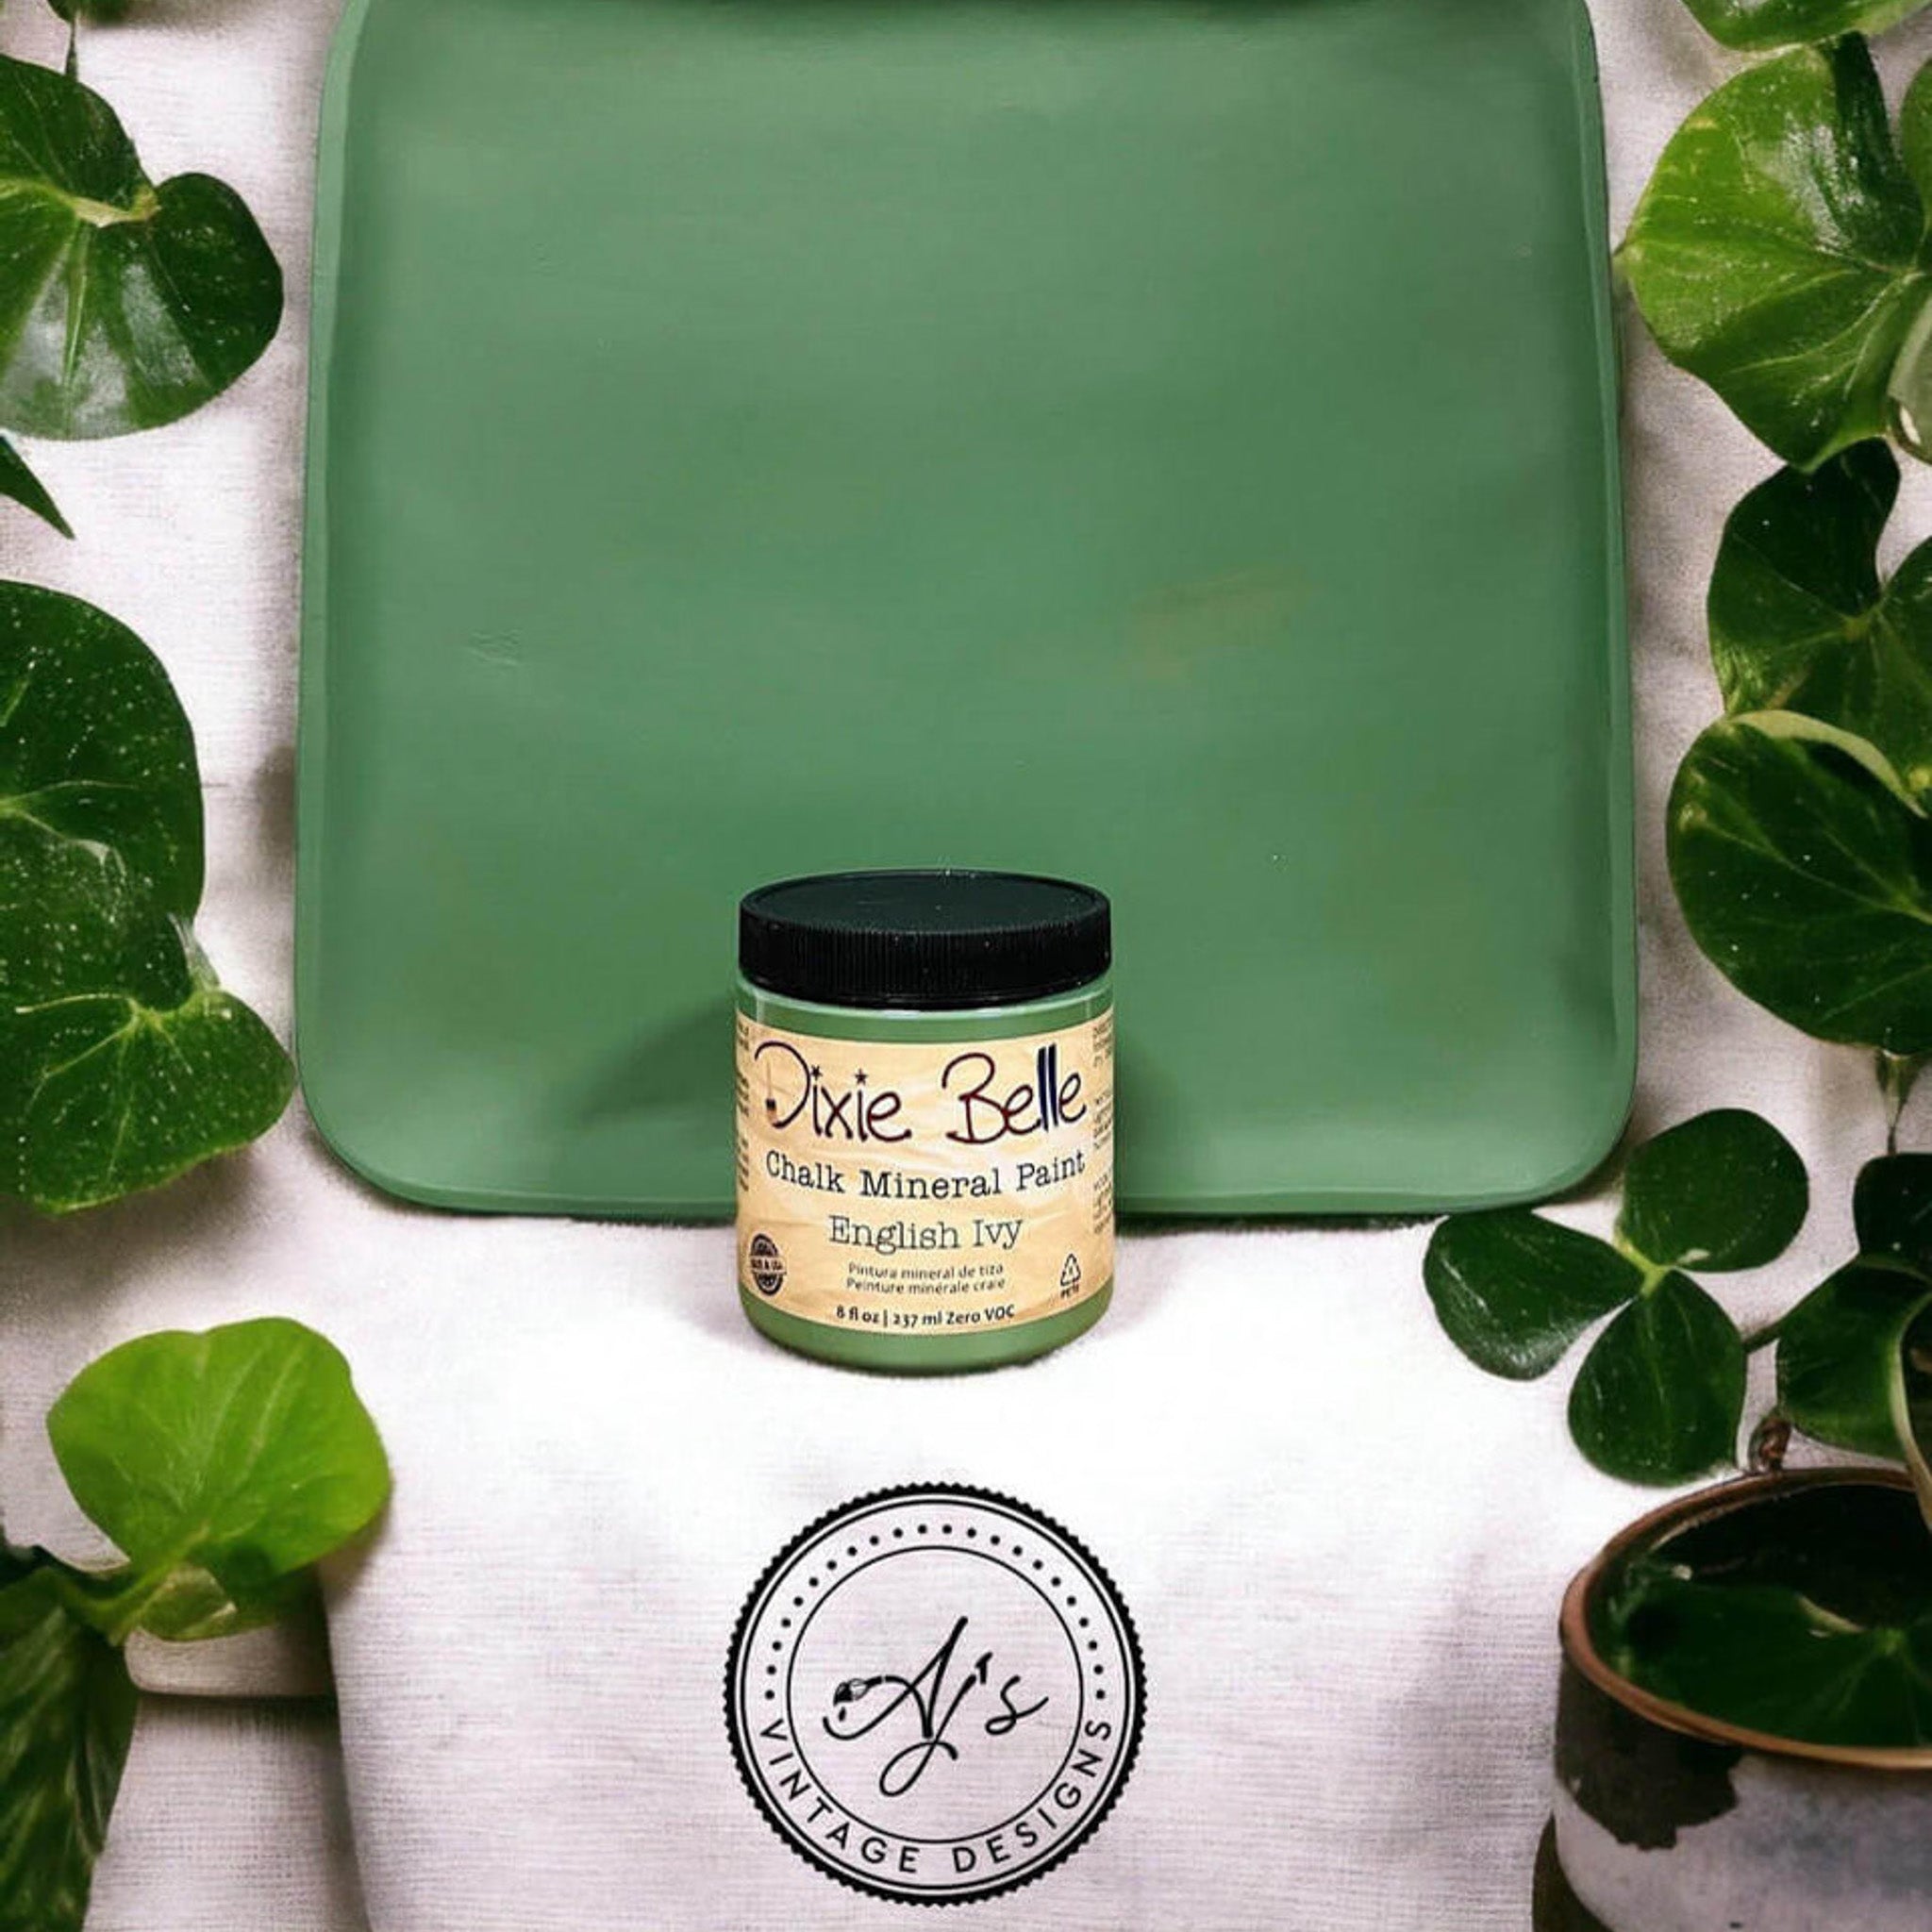 A wood tray repainted by AJ's Vintage Designs using Dixie Belle's English Ivy chalk mineral paint is pictured with a container of the paint. Green foliage surround the tray.